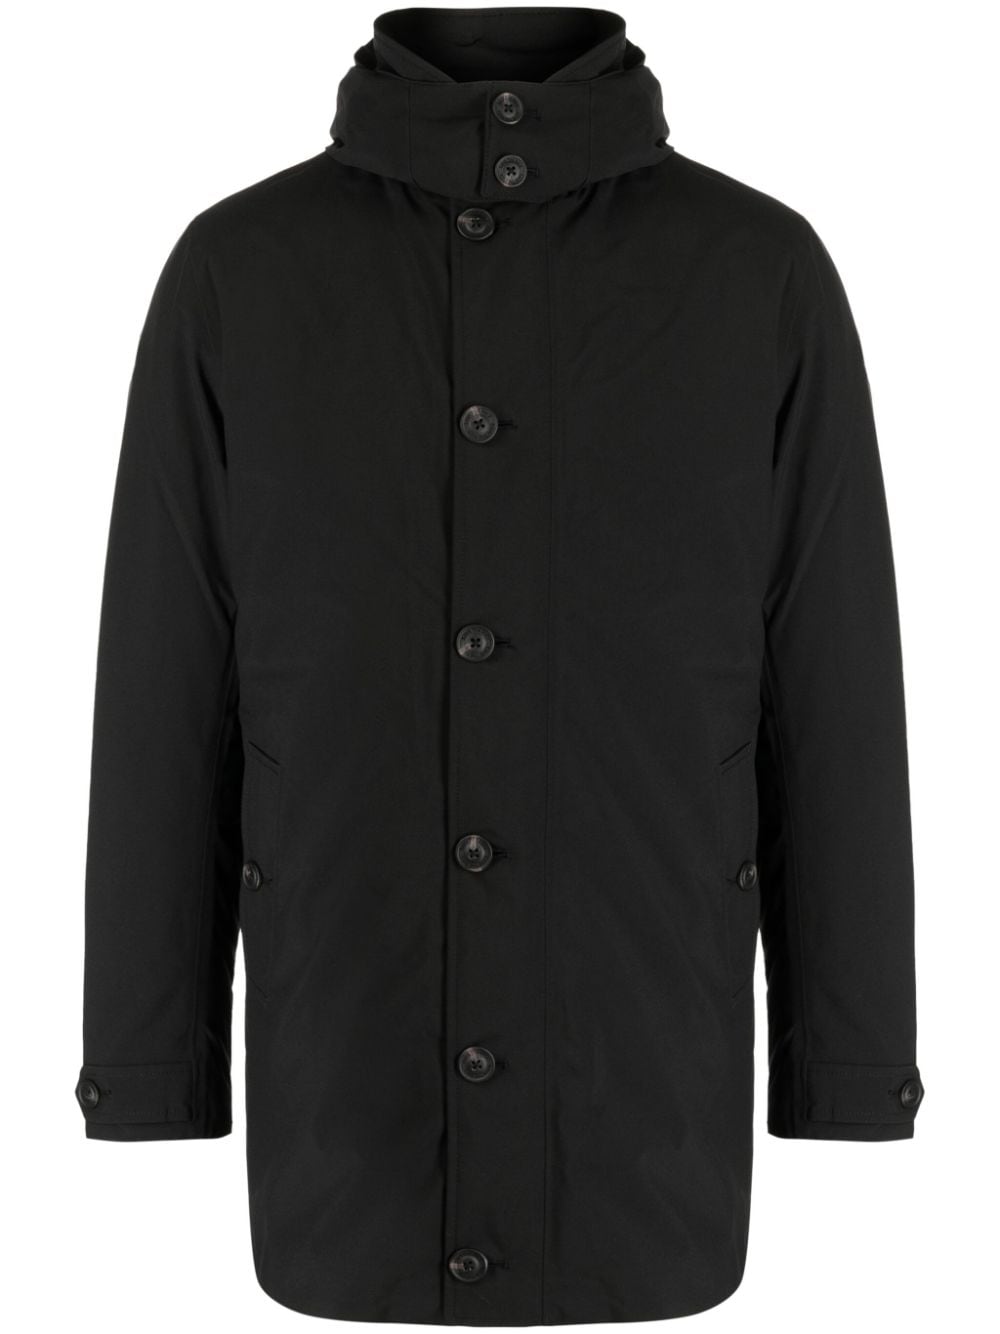 Save The Duck hooded padded jacket - Black von Save The Duck